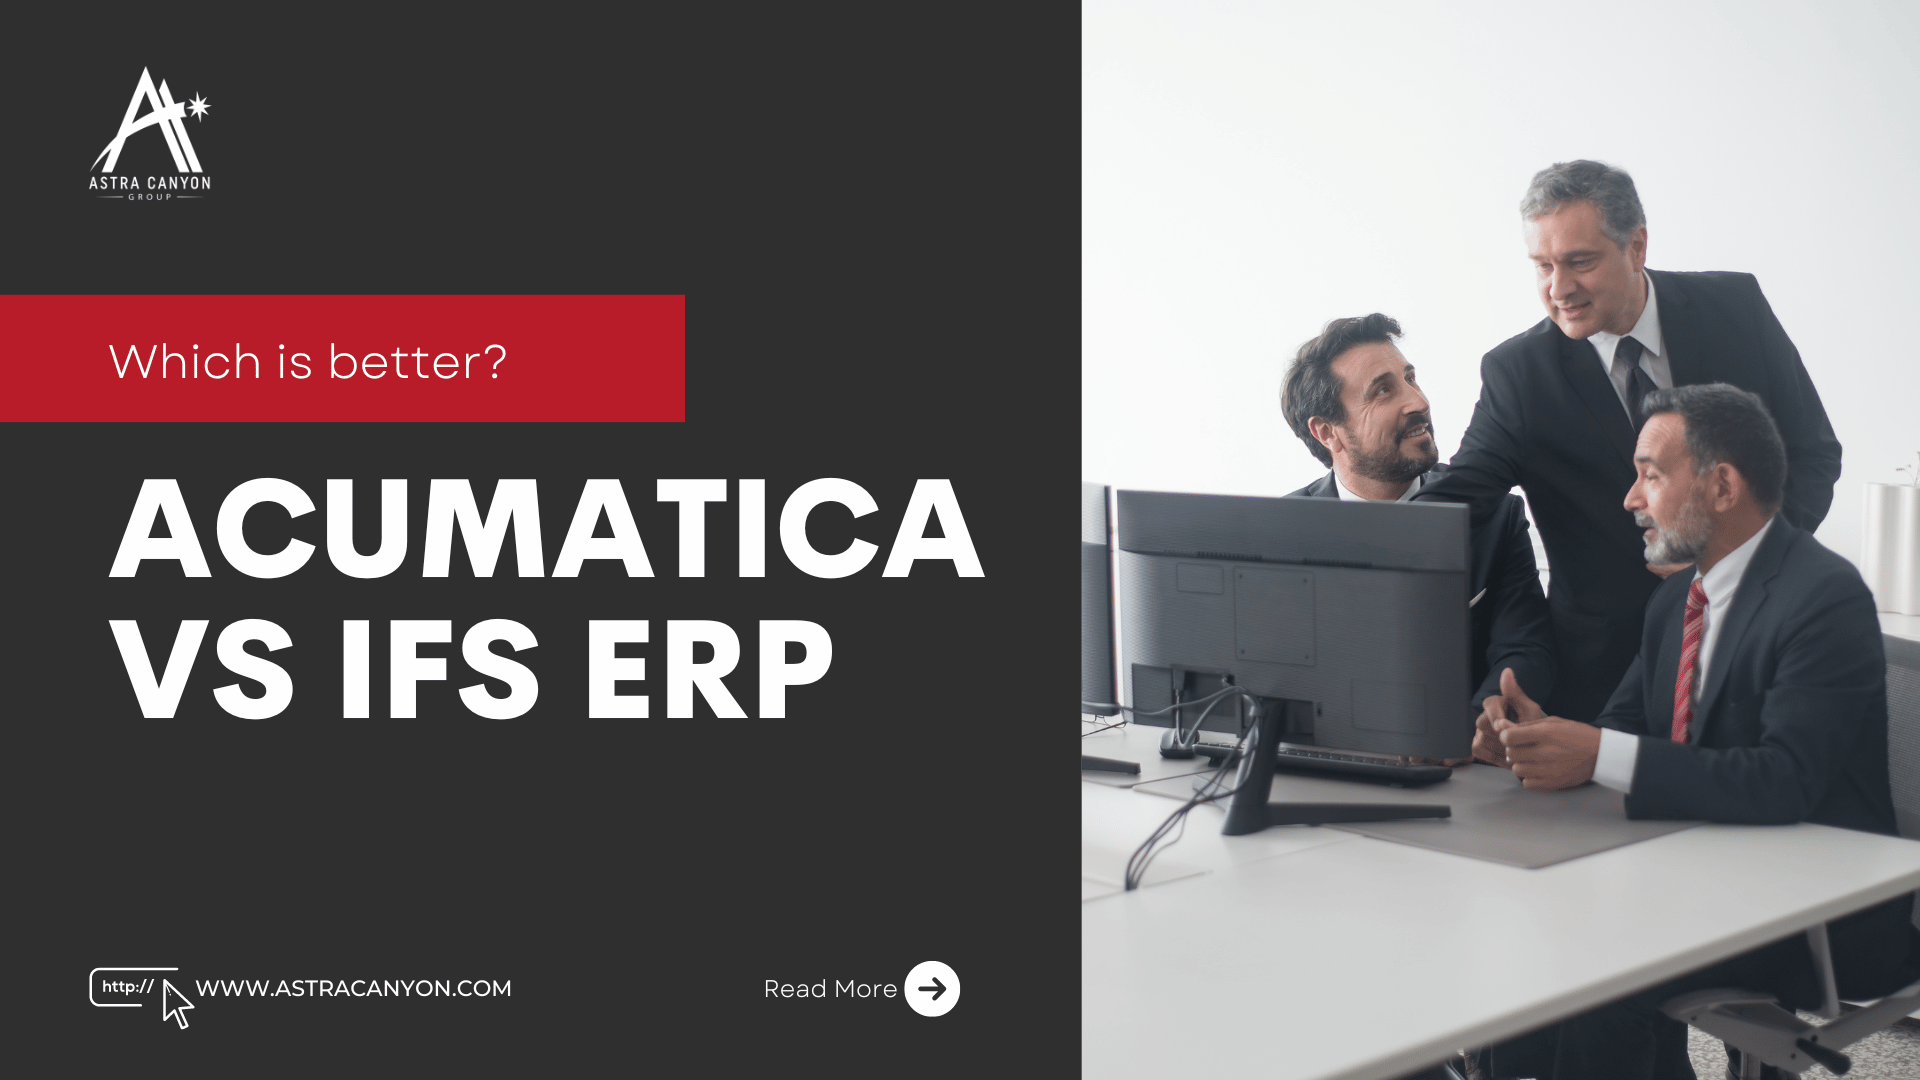 Acumatica vs IFS ERP: Which is the Superior Solution?